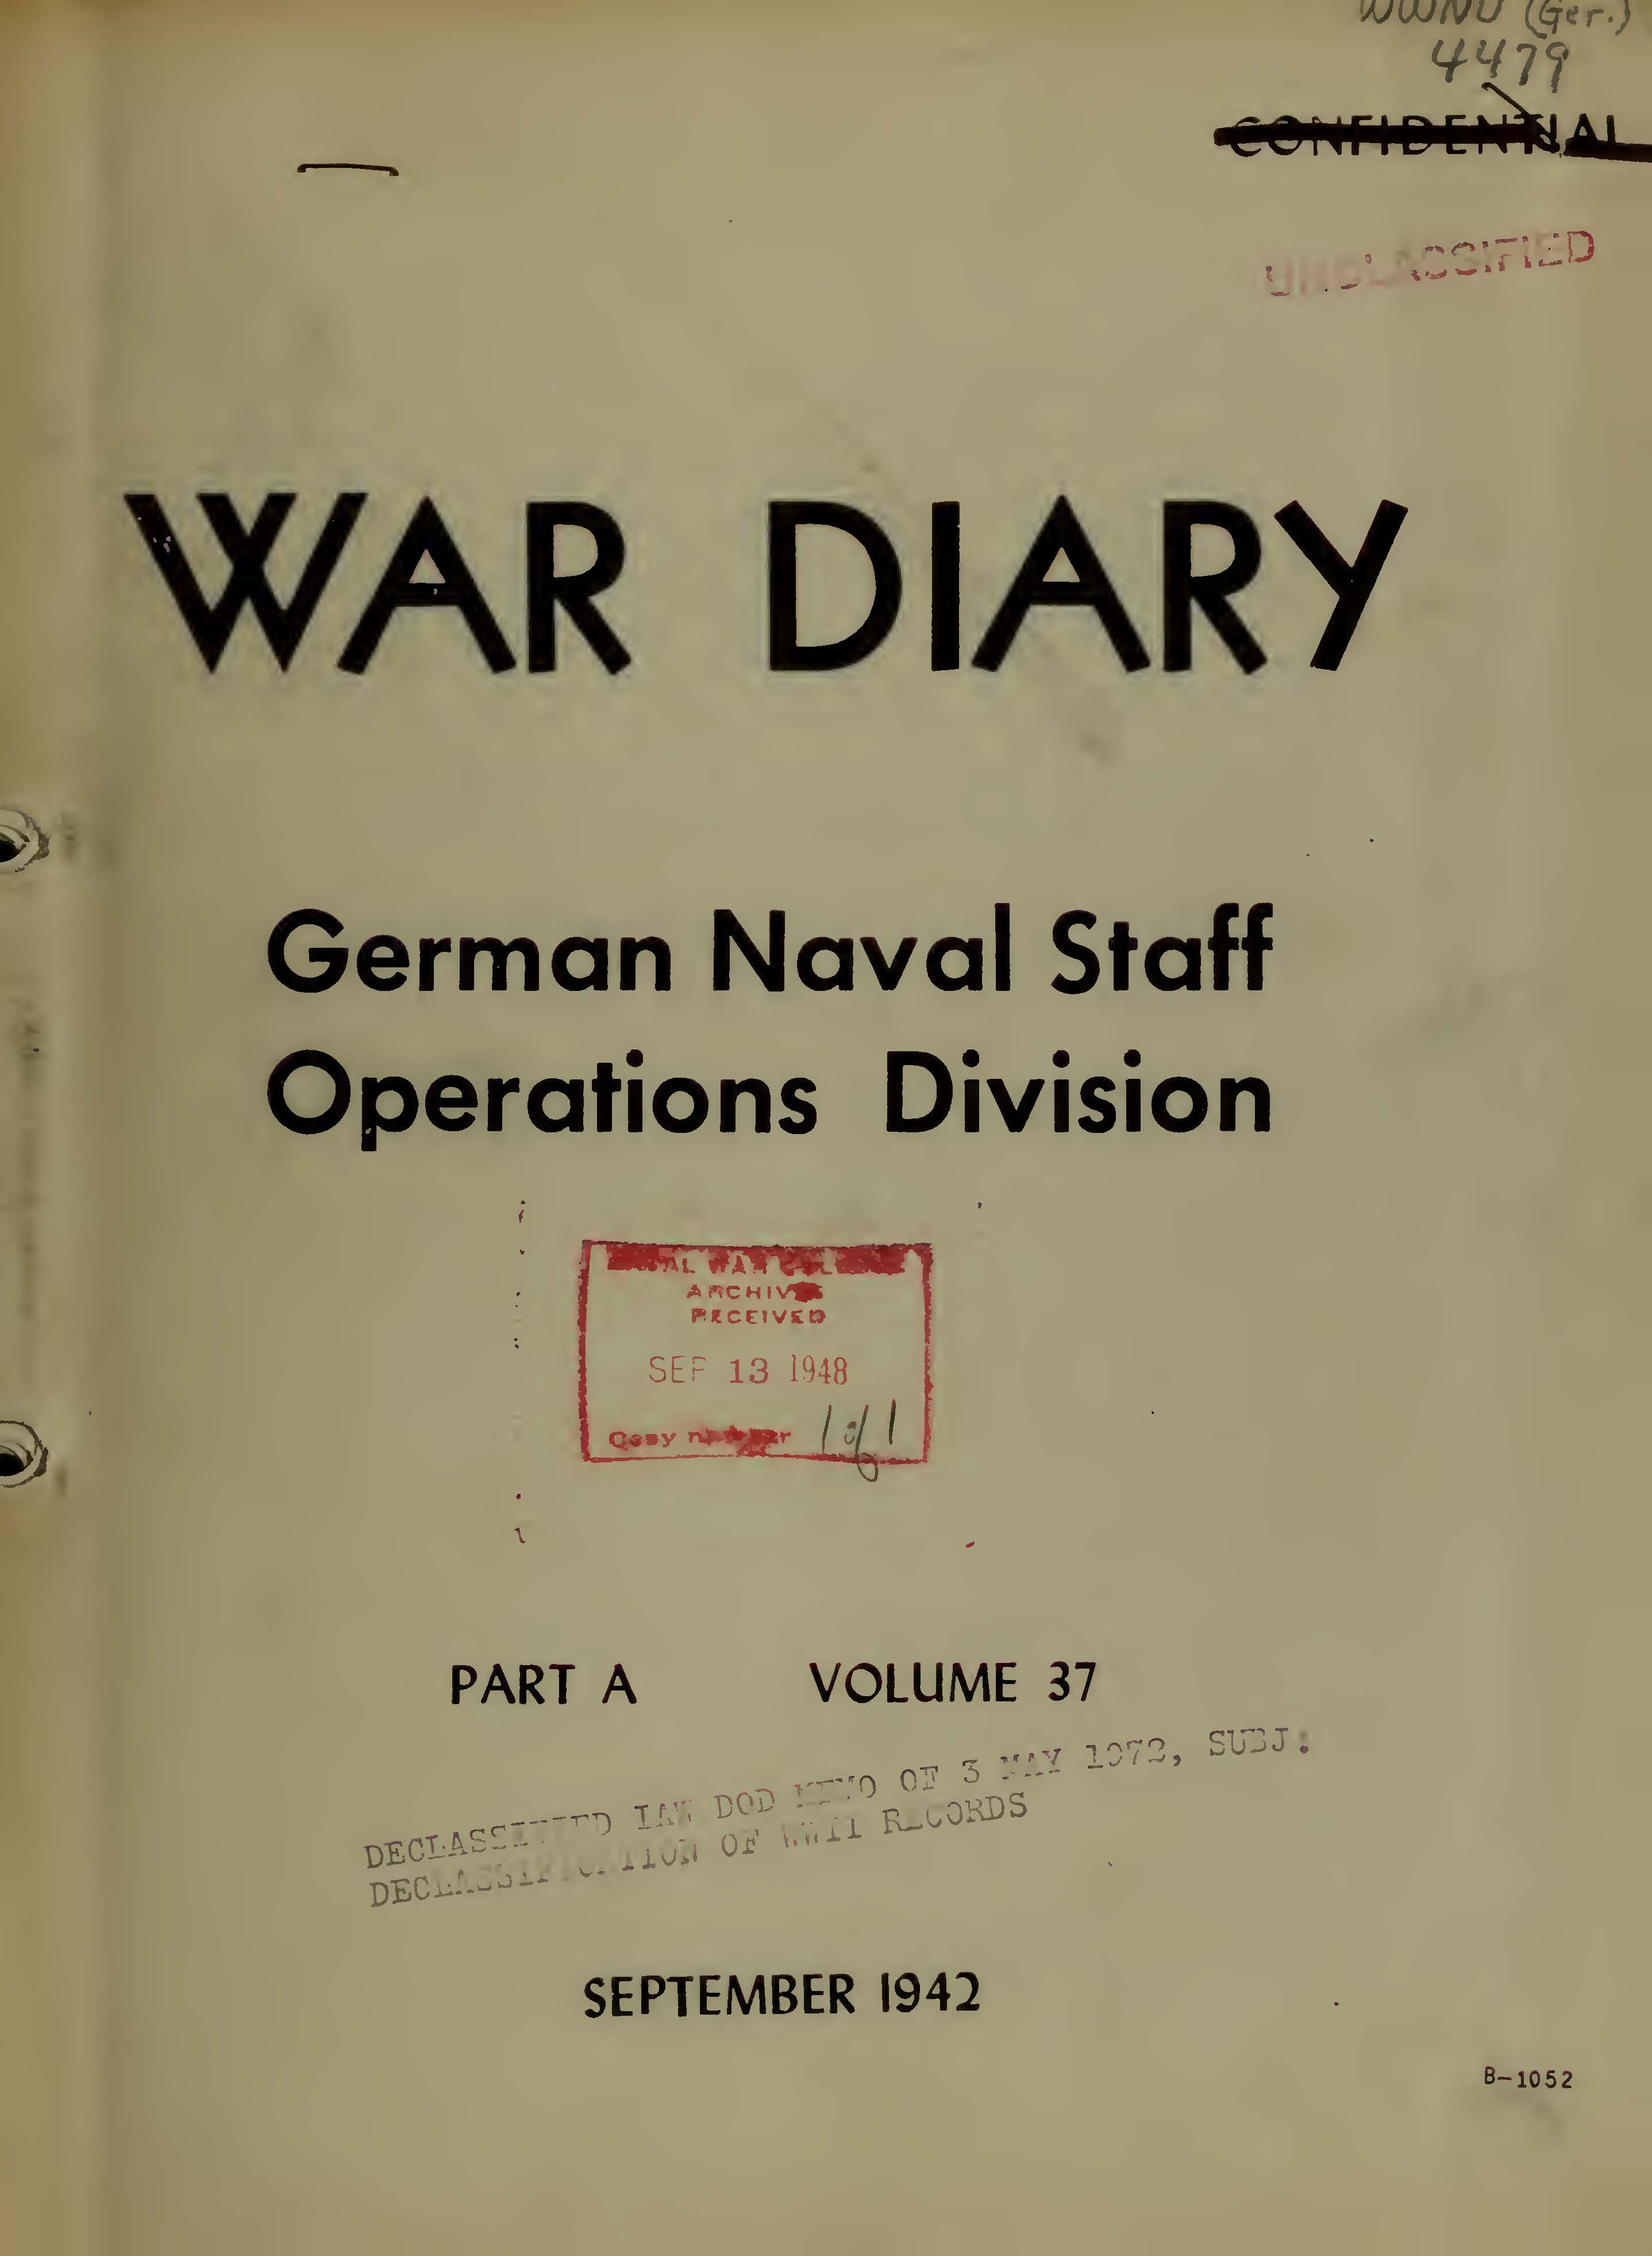 War Diary of German Naval Staff (Operations Division) Part A, Volume 37, September 1942